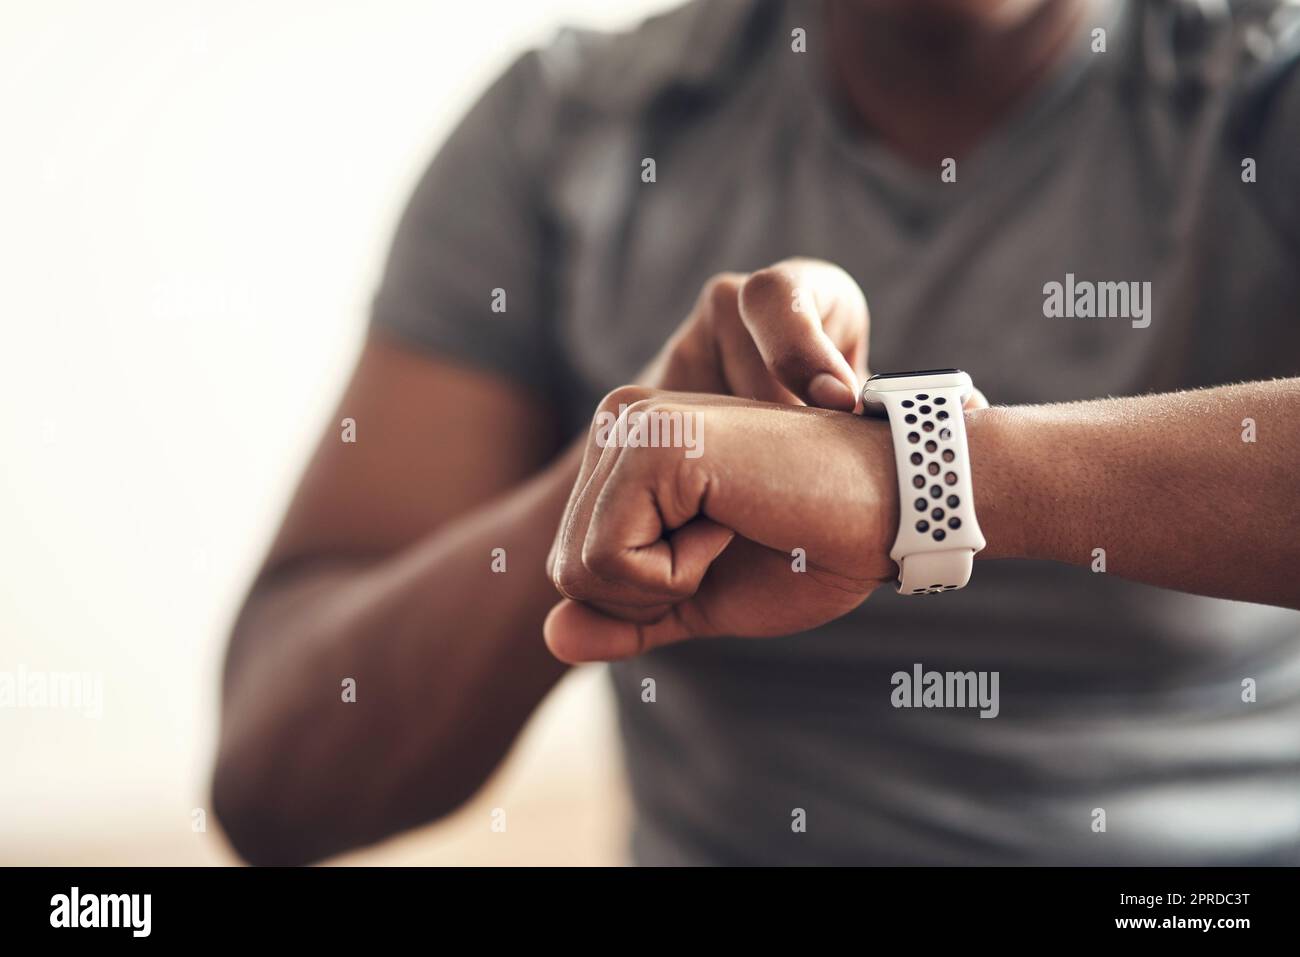 Dont fall behind, keep up the pace. Closeup shot of an unrecognisable man checking his wristwatch while exercising at home. Stock Photo